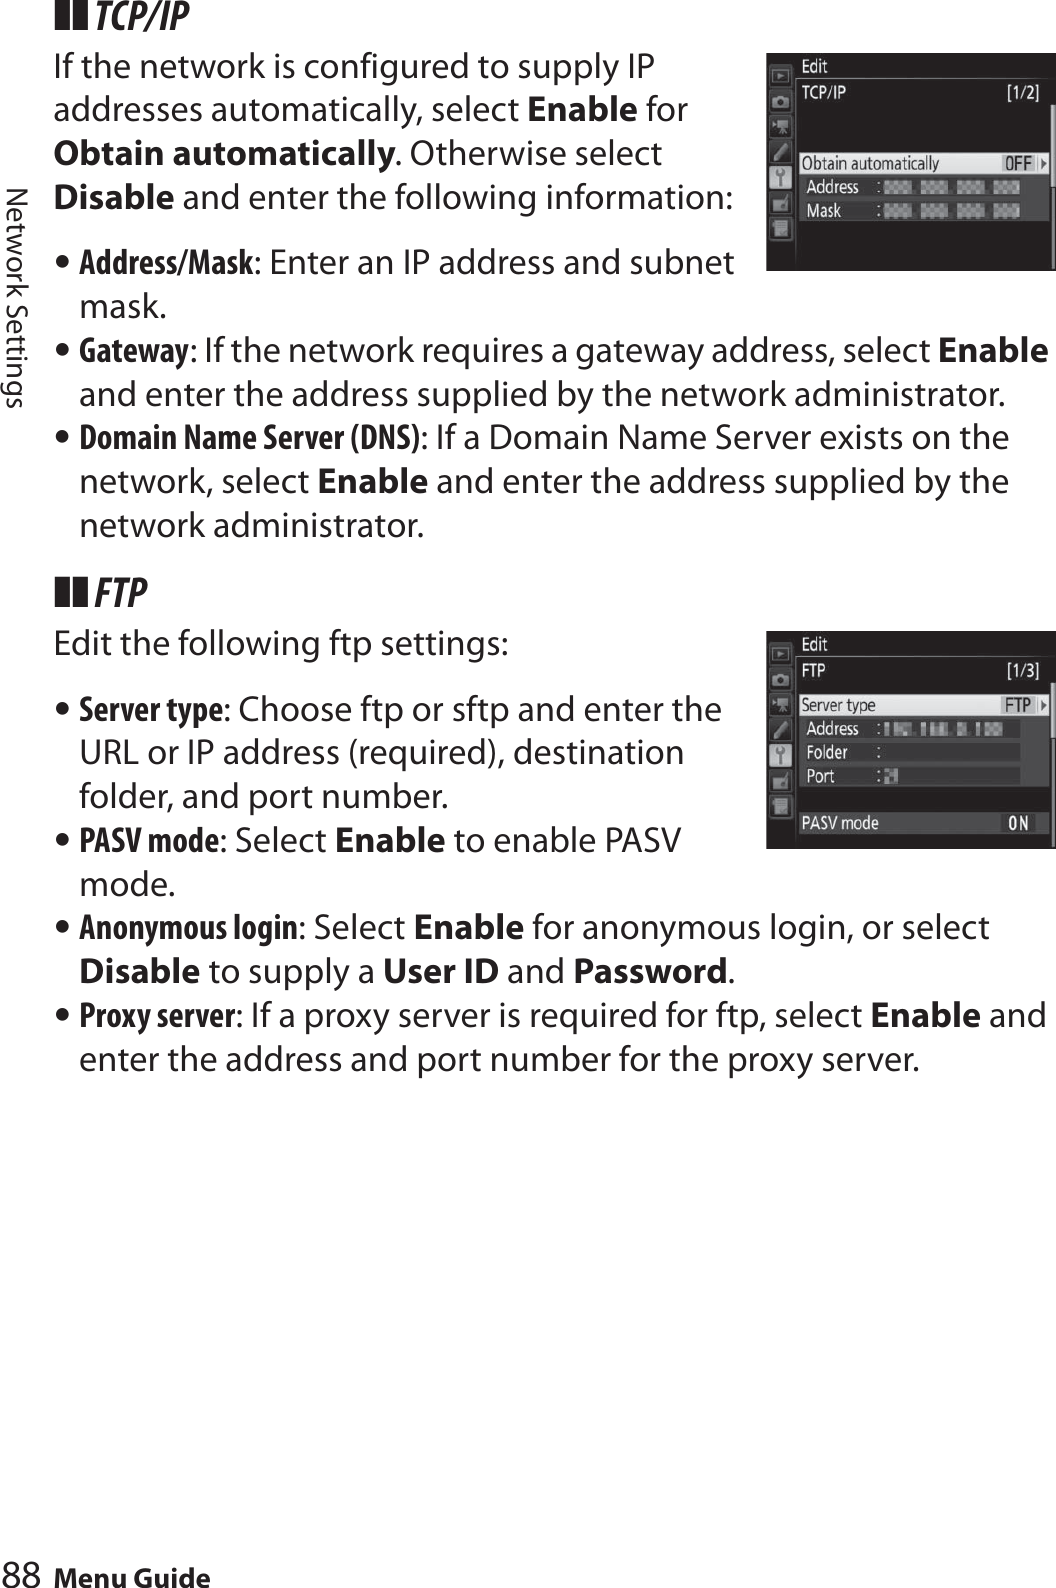 88 Menu GuideNetwork Settings❚❚ TCP/IPIf the network is configured to supply IP addresses automatically, select Enable for Obtain automatically. Otherwise select Disable and enter the following information:•Address/Mask: Enter an IP address and subnet mask.•Gateway: If the network requires a gateway address, select Enable and enter the address supplied by the network administrator.•Domain Name Server (DNS): If a Domain Name Server exists on the network, select Enable and enter the address supplied by the network administrator.❚❚ FTPEdit the following ftp settings:•Server type: Choose ftp or sftp and enter the URL or IP address (required), destination folder, and port number.•PASV mode: Select Enable to enable PASV mode.•Anonymous login: Select Enable for anonymous login, or select Disable to supply a User ID and Password.•Proxy server: If a proxy server is required for ftp, select Enable and enter the address and port number for the proxy server.